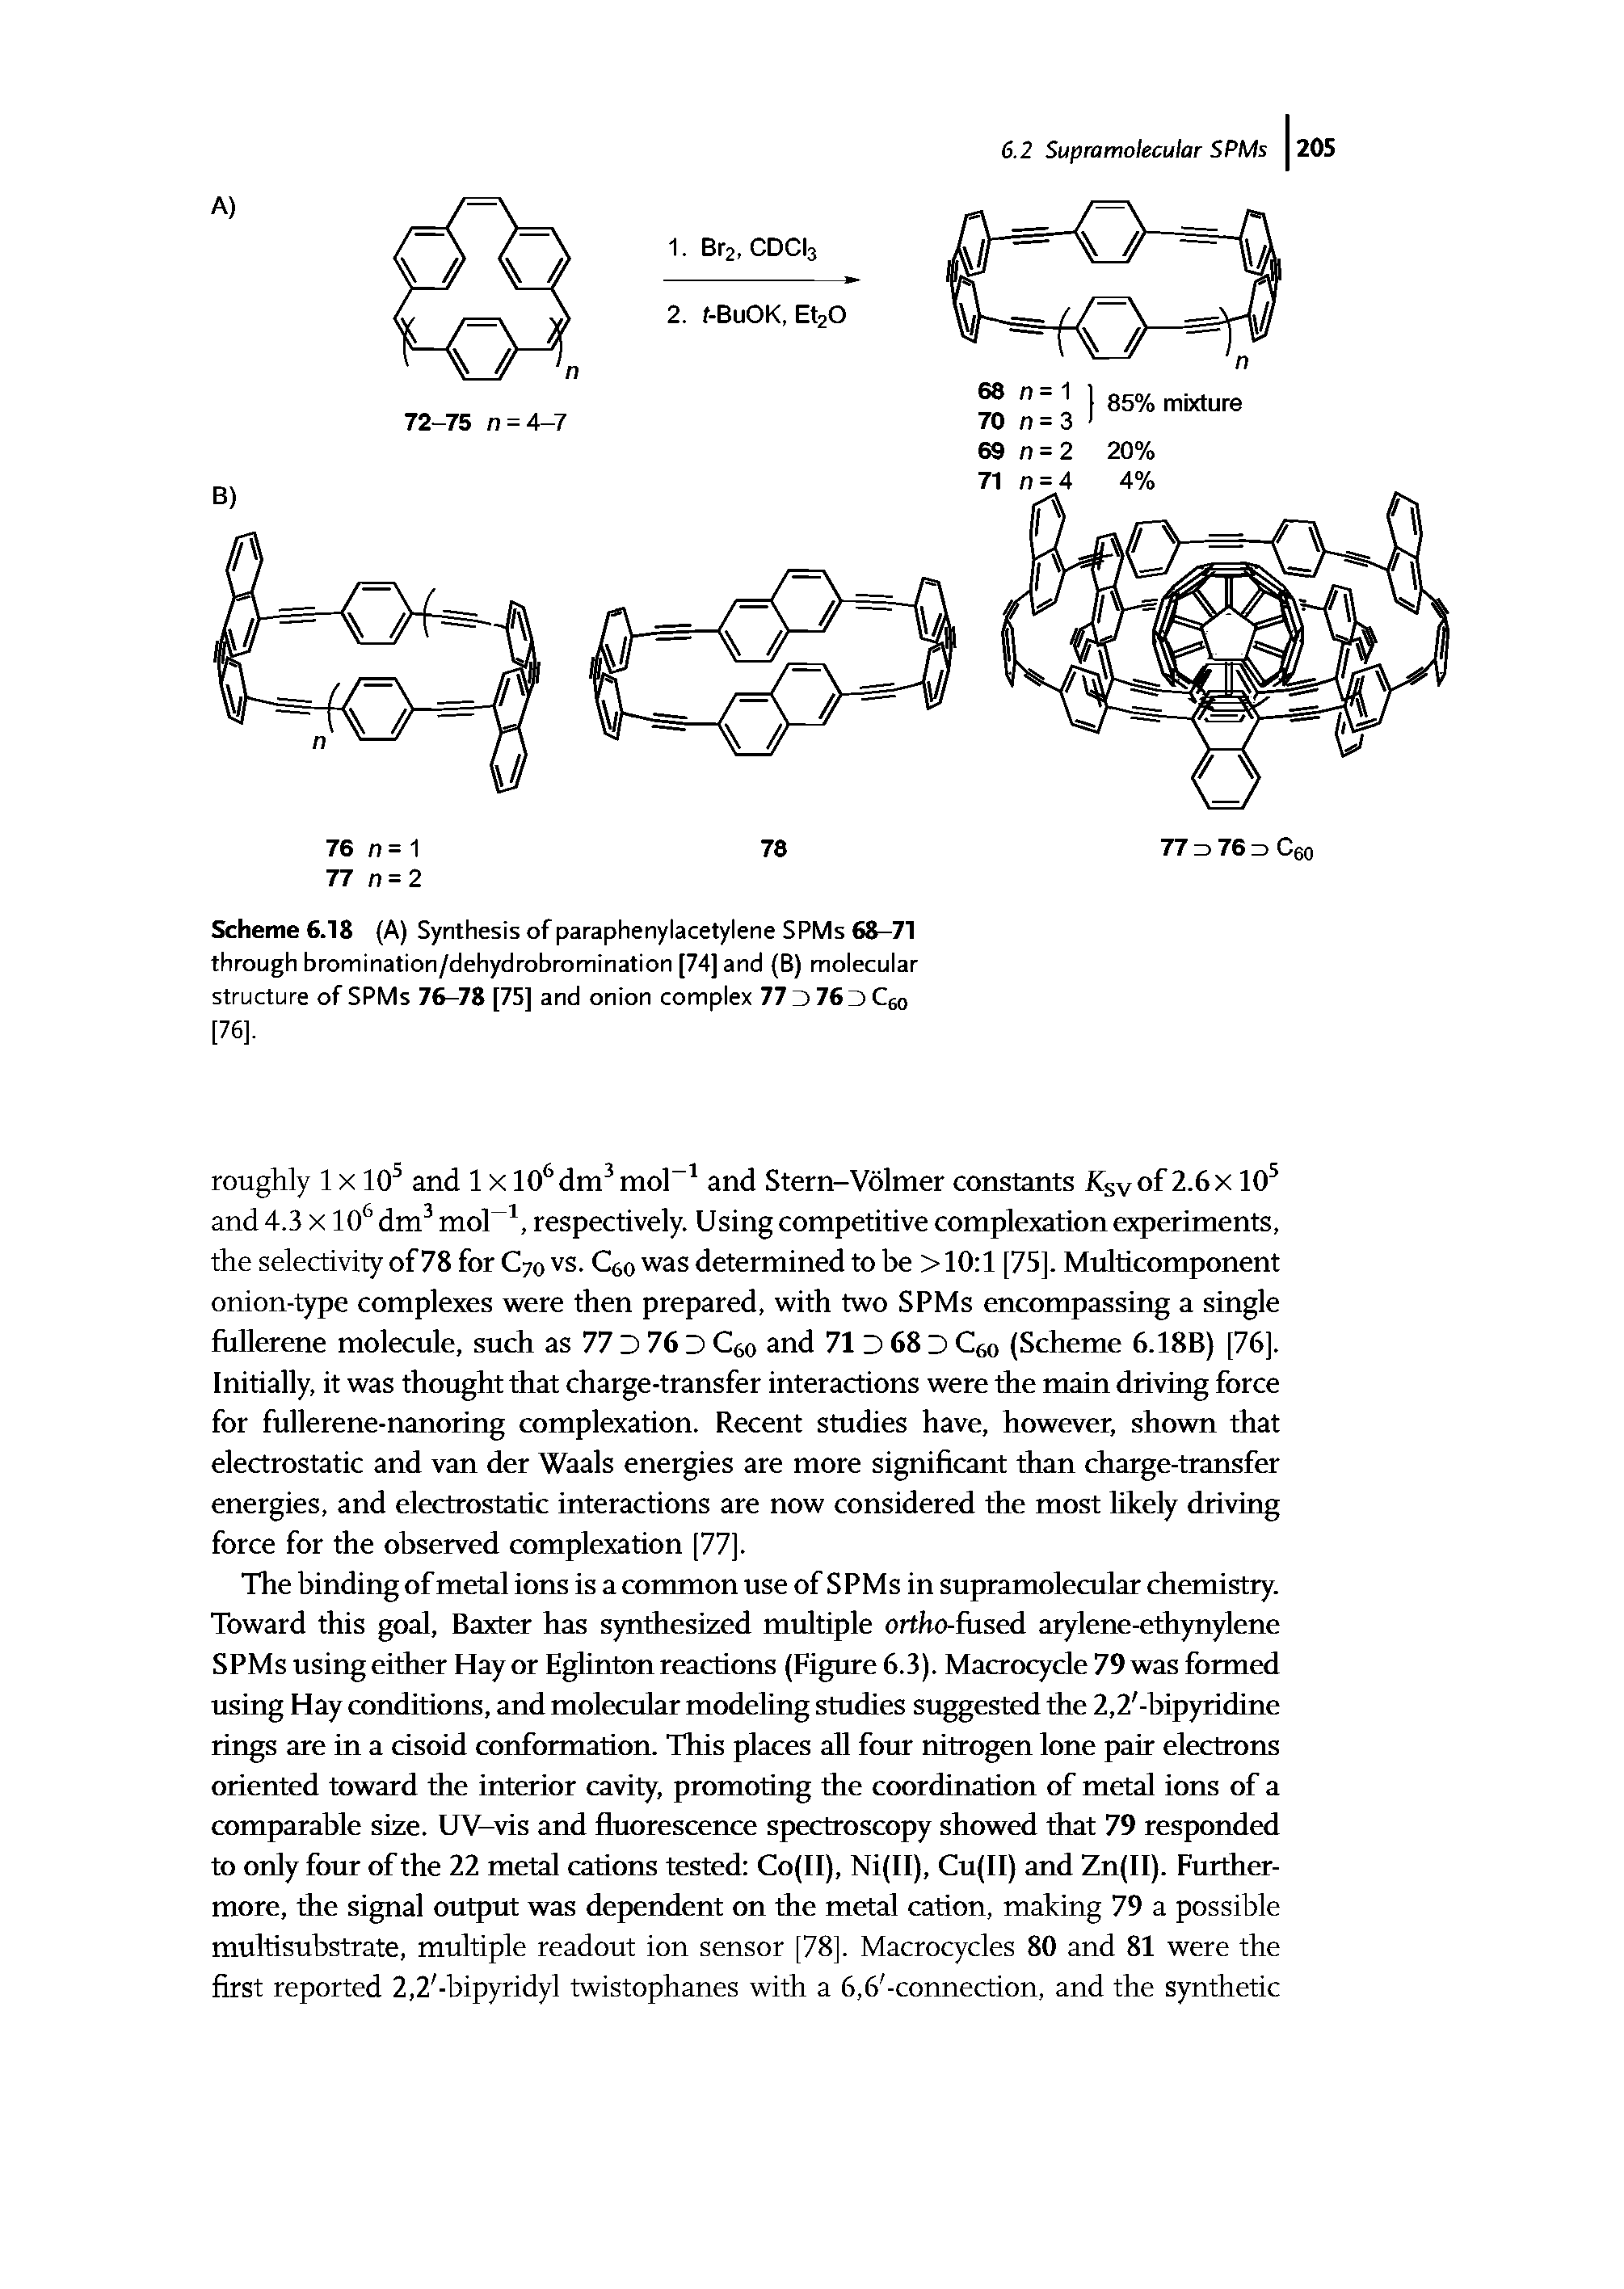 Scheme 6.18 (A) Synthesis of paraphenylacetylene SPMs 68-71 through bromination/dehydrobromination [74] and (B) molecular structure of SPMs 76-78 [75] and onion complex 77 D 76 Qo [76].